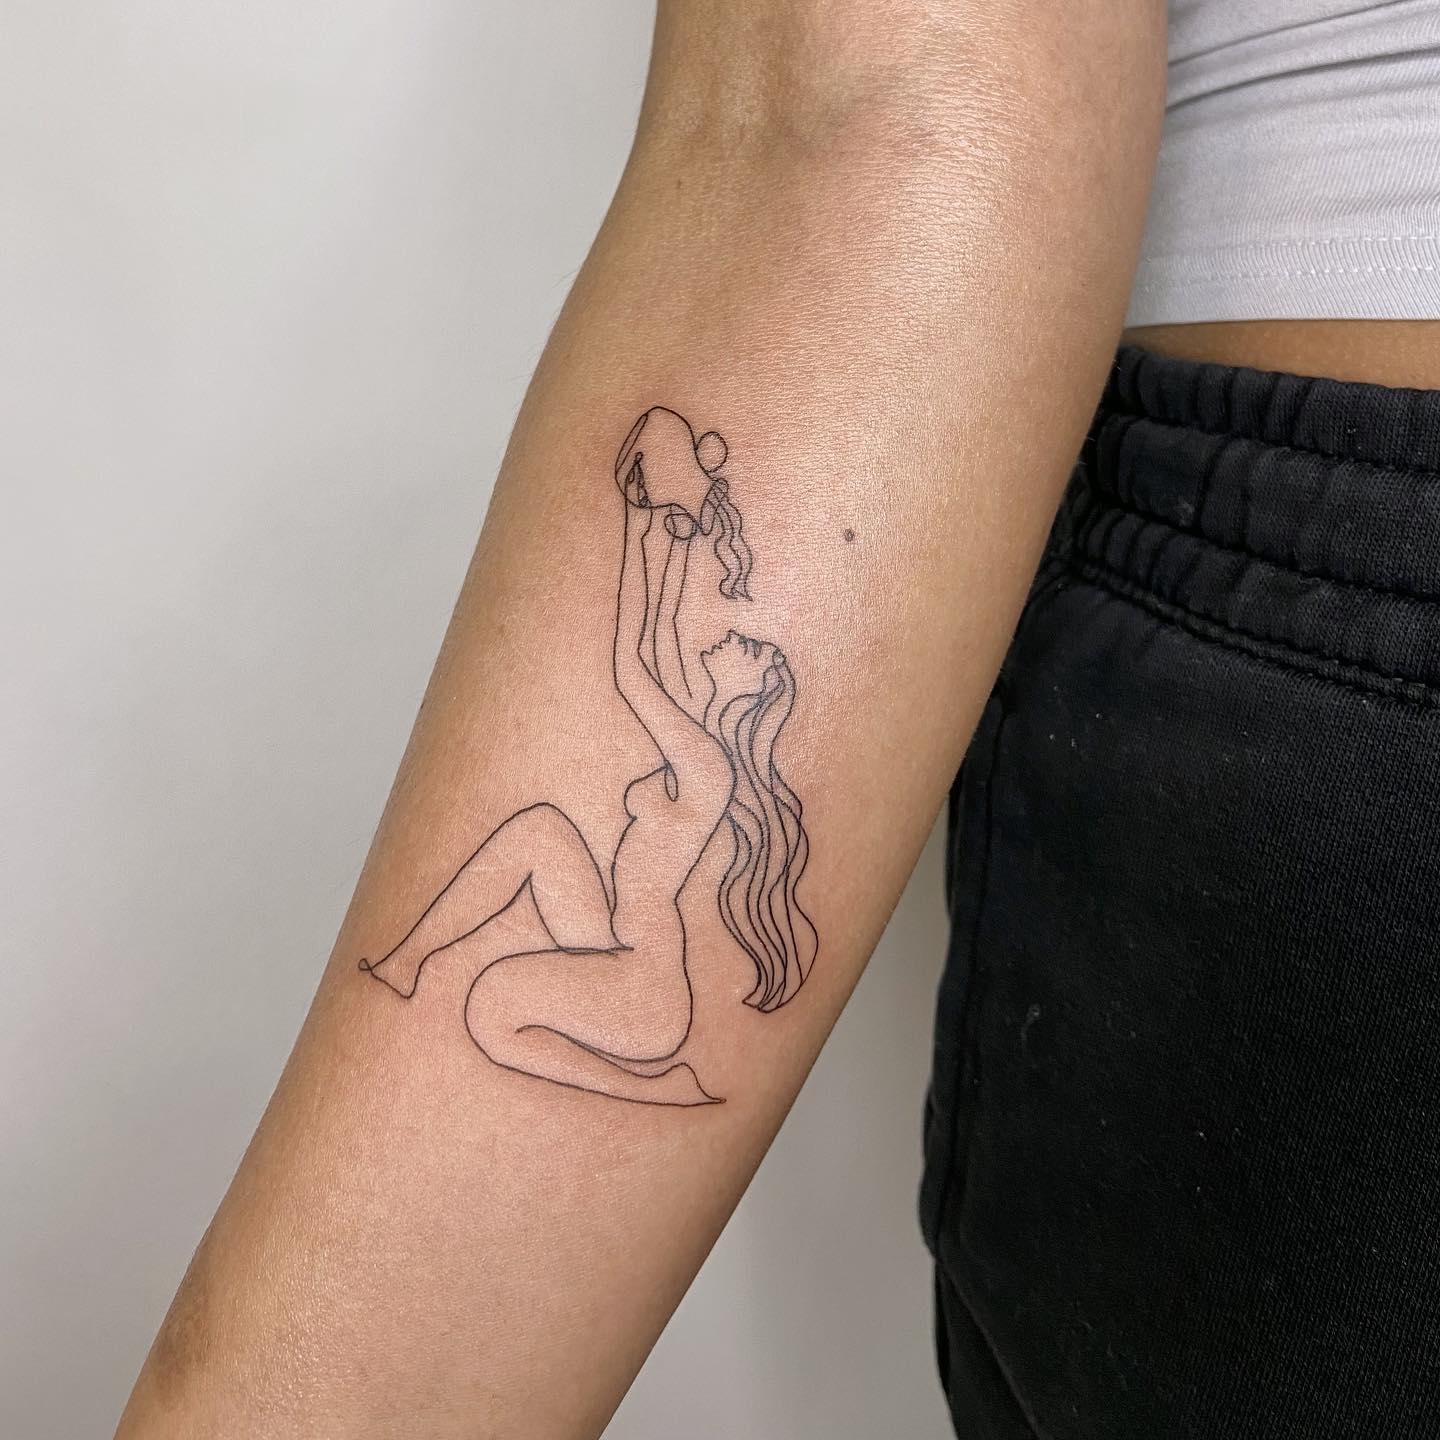 In line art tattoos, marks are used to create images and they offer a perfect look. A naked woman is pouring some water into her mouth in this tattoo design. Her hair is in the shape of water waves, which looks amazing. If you like minimalist tattoos, this is the one you should go for.